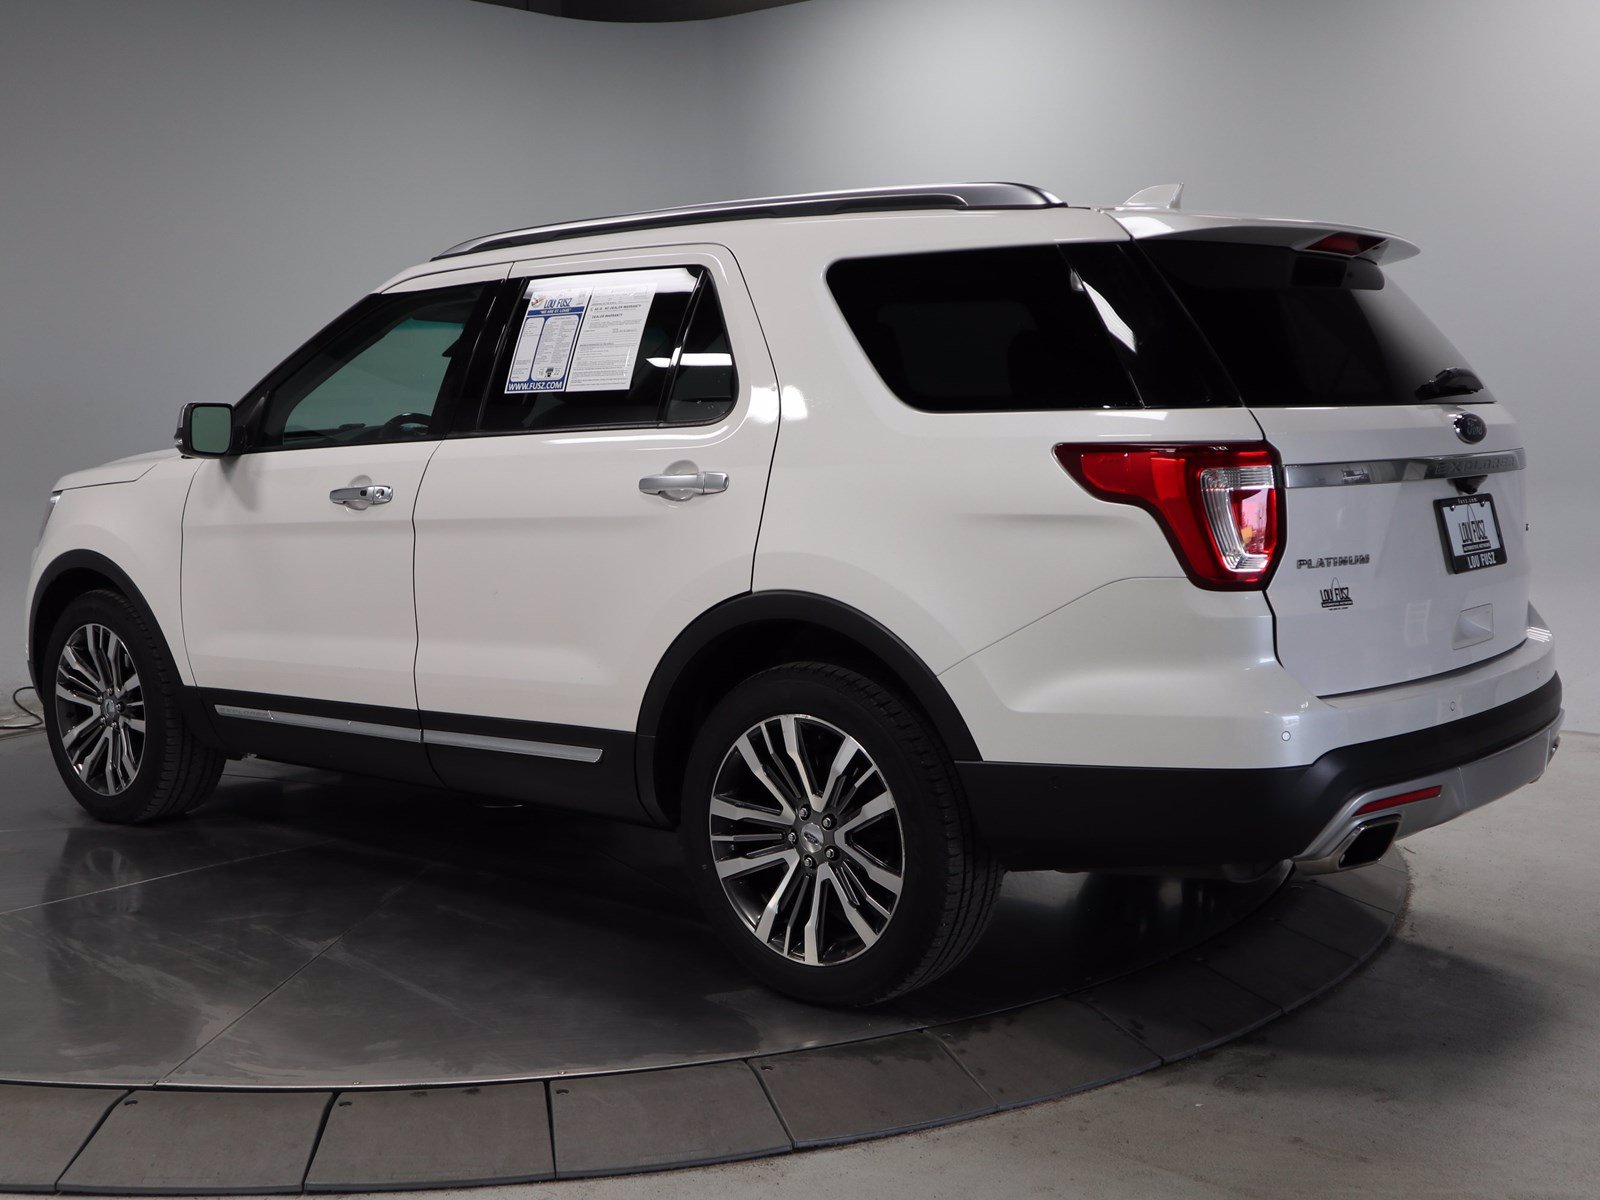 PreOwned 2017 Ford Explorer Platinum 4WD Sport Utility